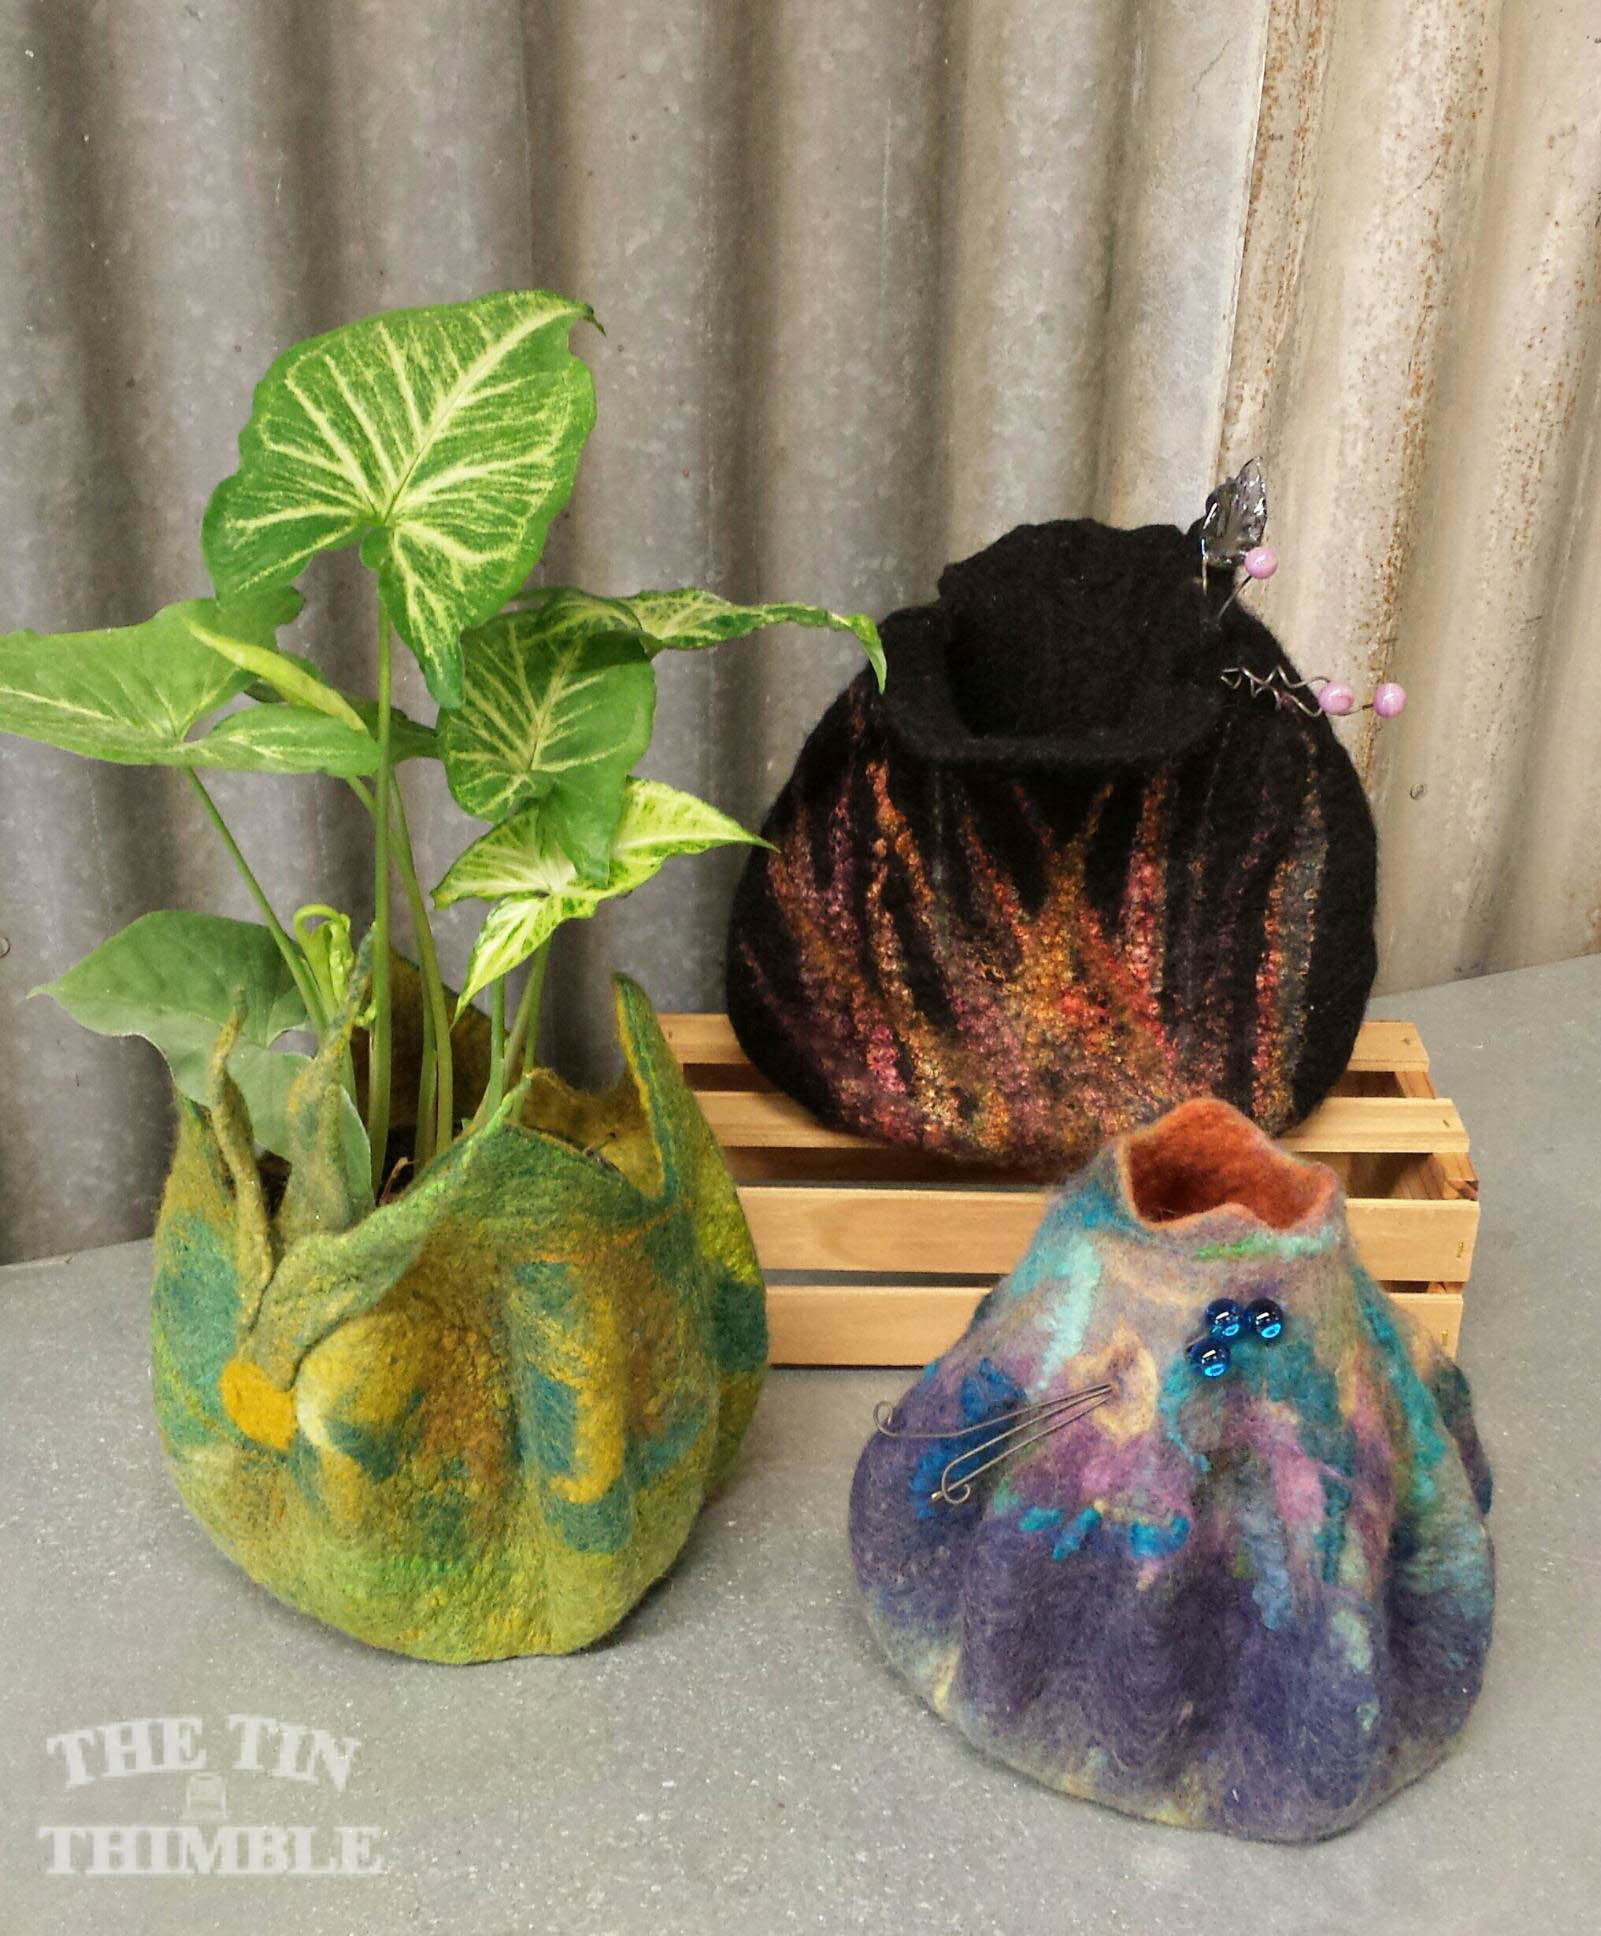 Felted Vessel Workshop at The Tin Thimble